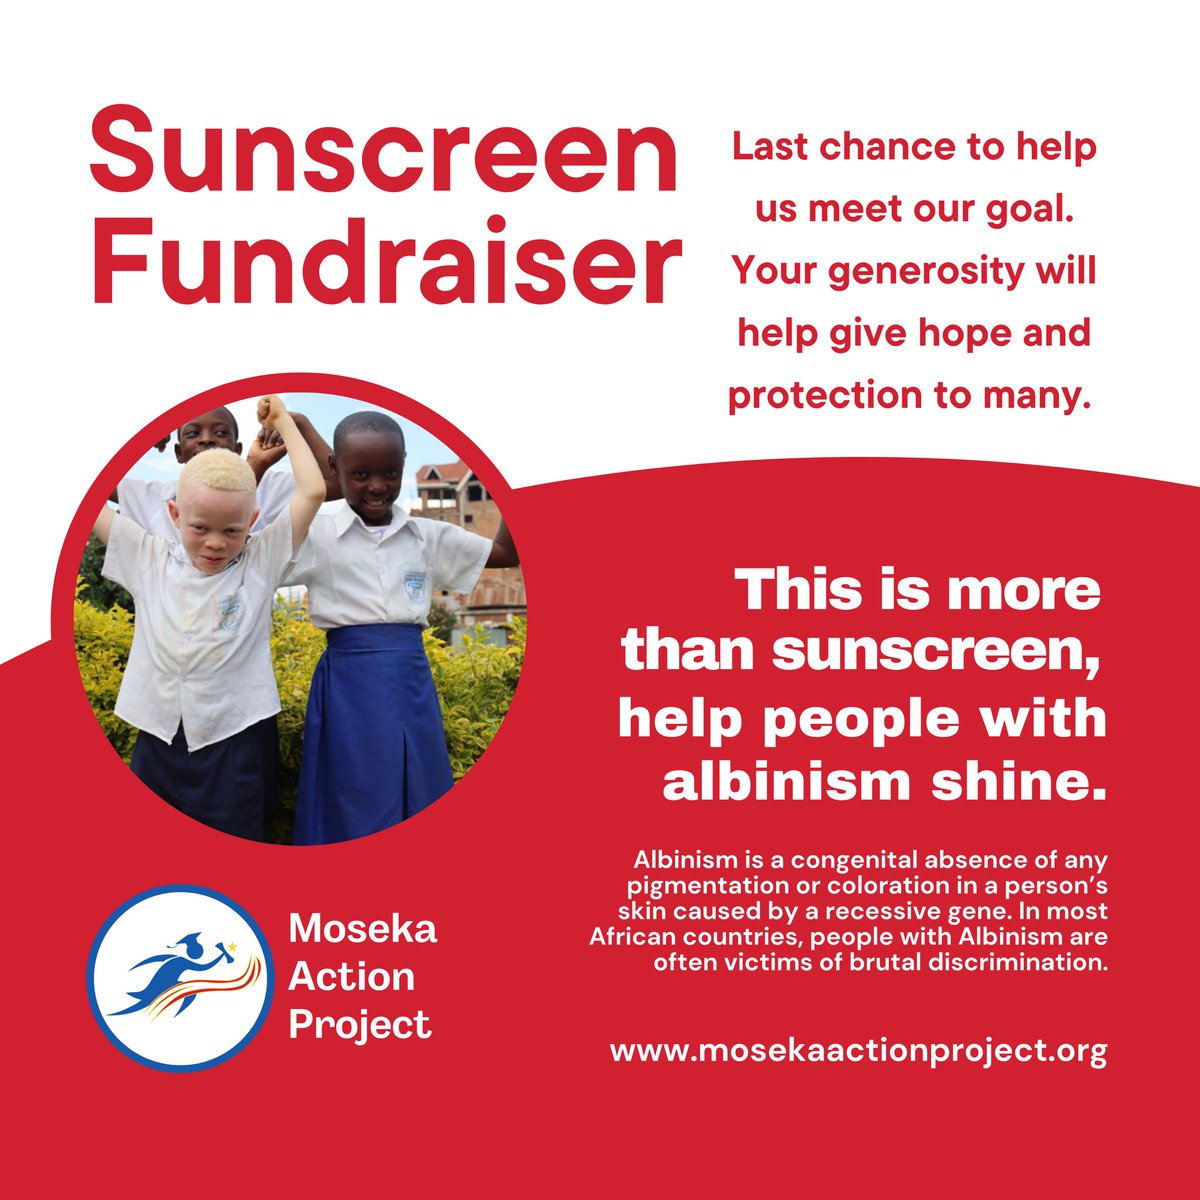 This week is your last chance to donate sunscreen to Democratic Republic of Congo's albino population. We are accepting donations through Amazon registry and Target registry. 

Please follow this link: linktr.ee/mosekaactionpr…

#nomelanin #albinismisbeautiful #albinism